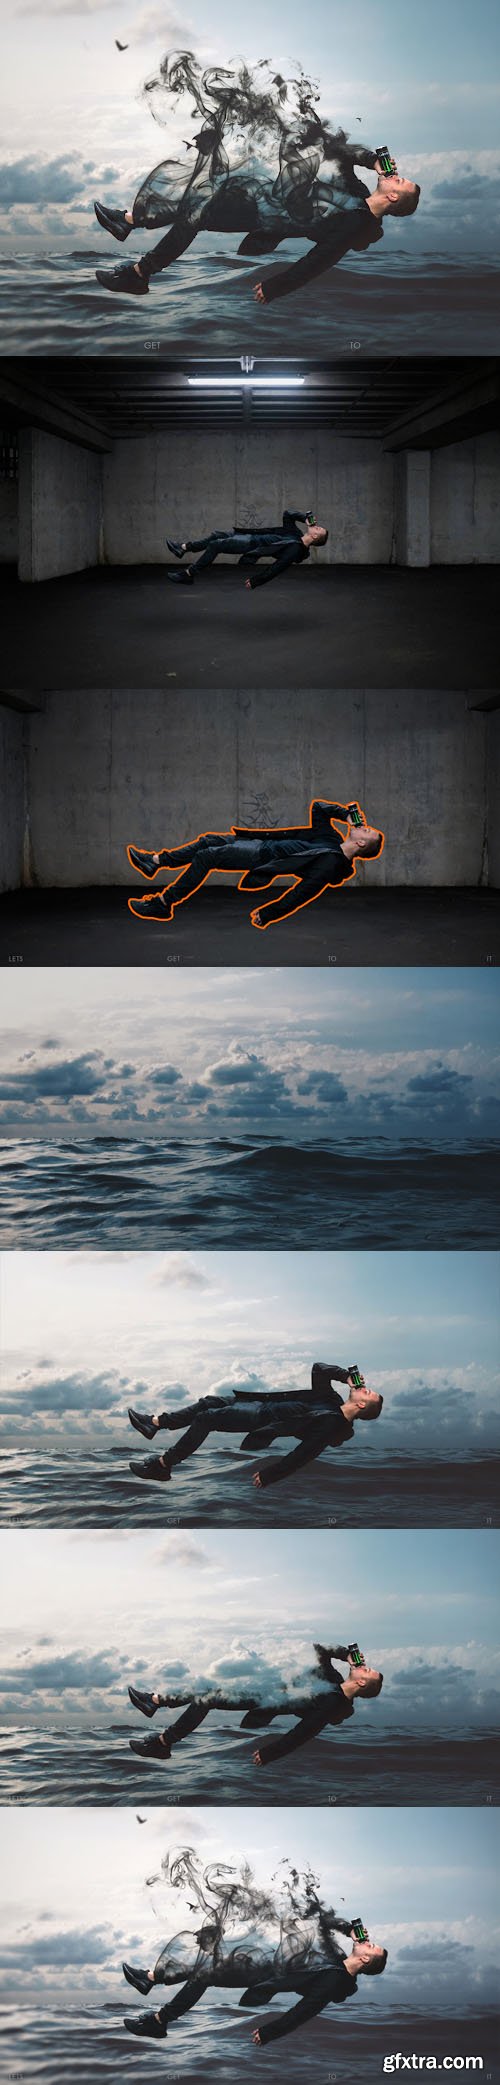 Floating Man With Smoke Over The Sea - Awesome Photoshop Manipulation + Tutorial